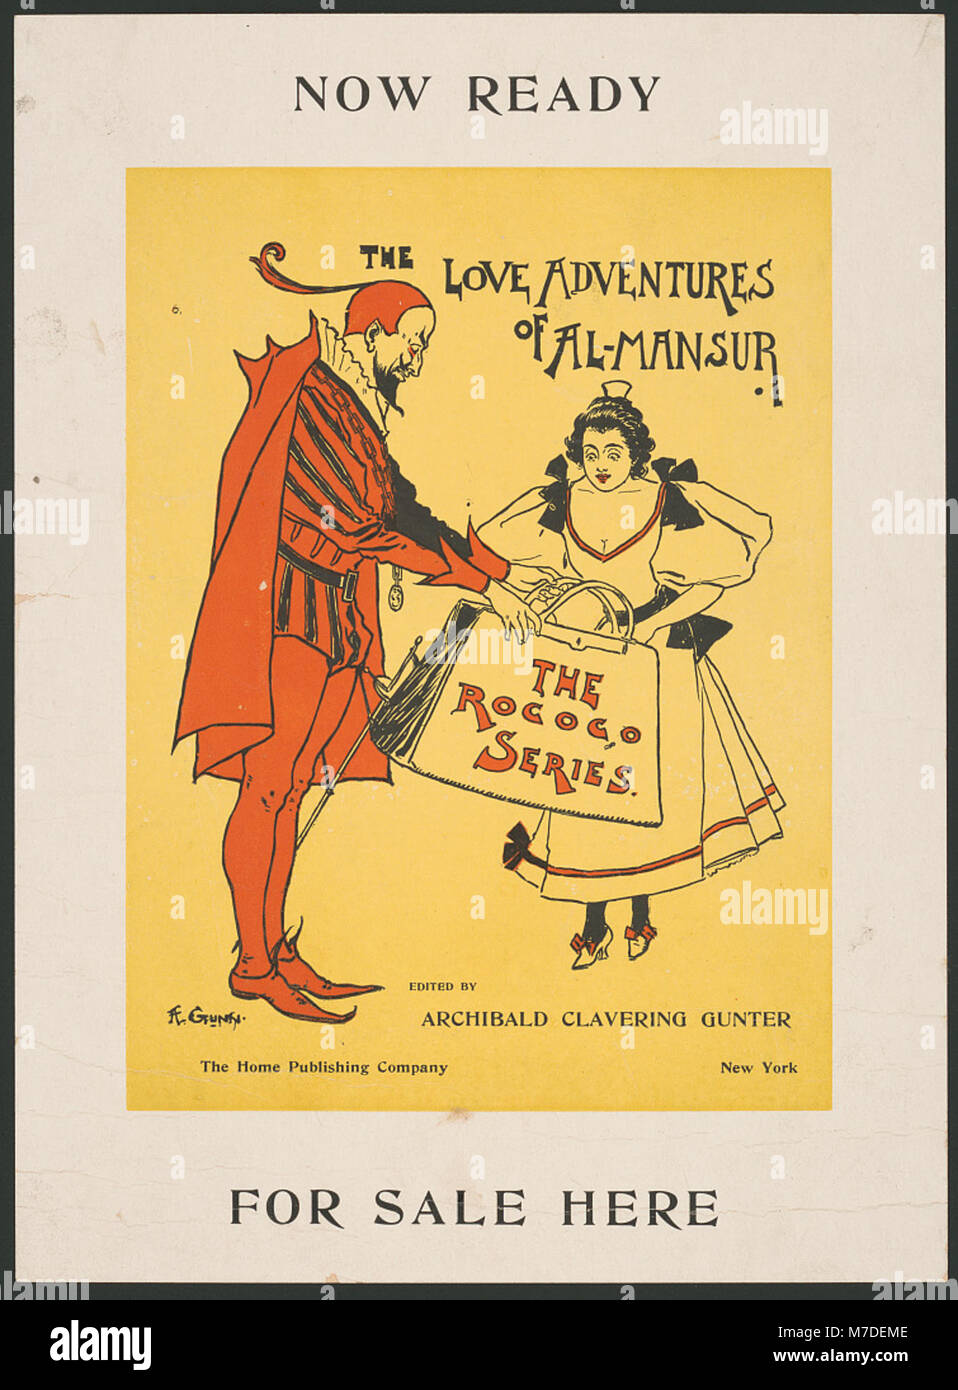 Now ready, The Love Adventures of Al-Mansur, edited by Archibald Clavering Gunter ... for sale here - A. Gunn. LCCN2014649614 Stock Photo